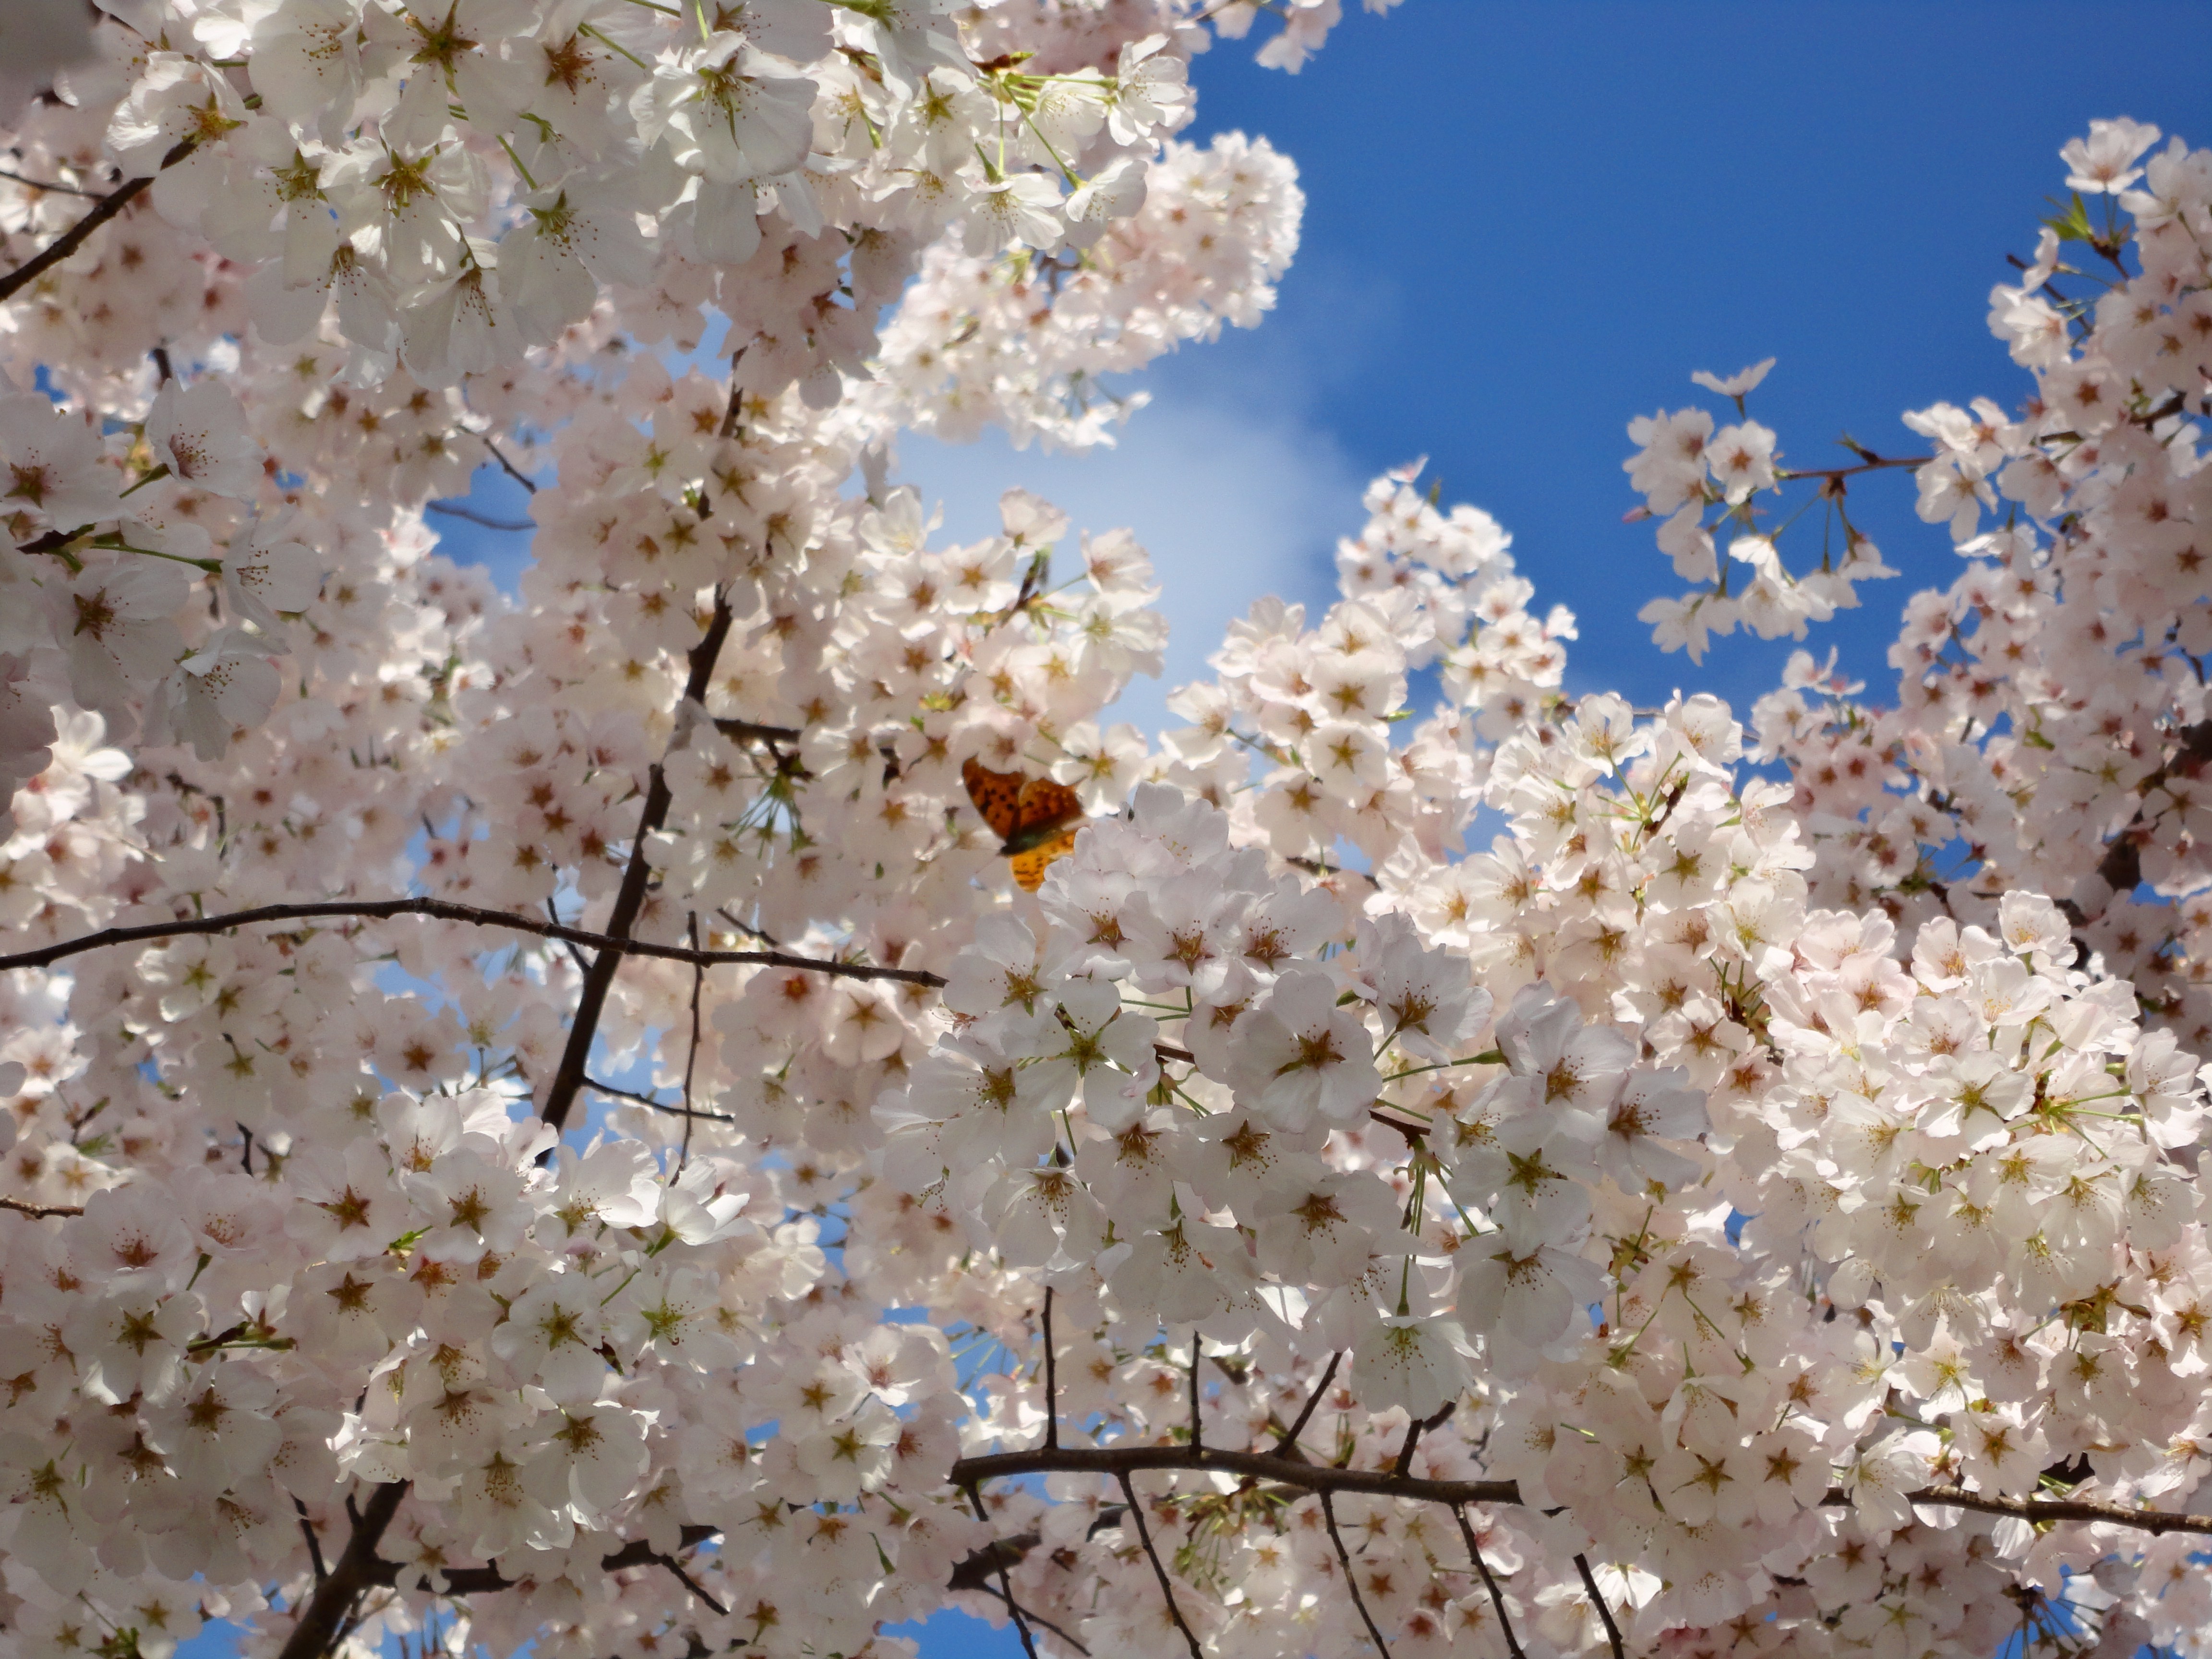 Kick-off the Spring by welcoming the Cherry Blossoms in Washington ...